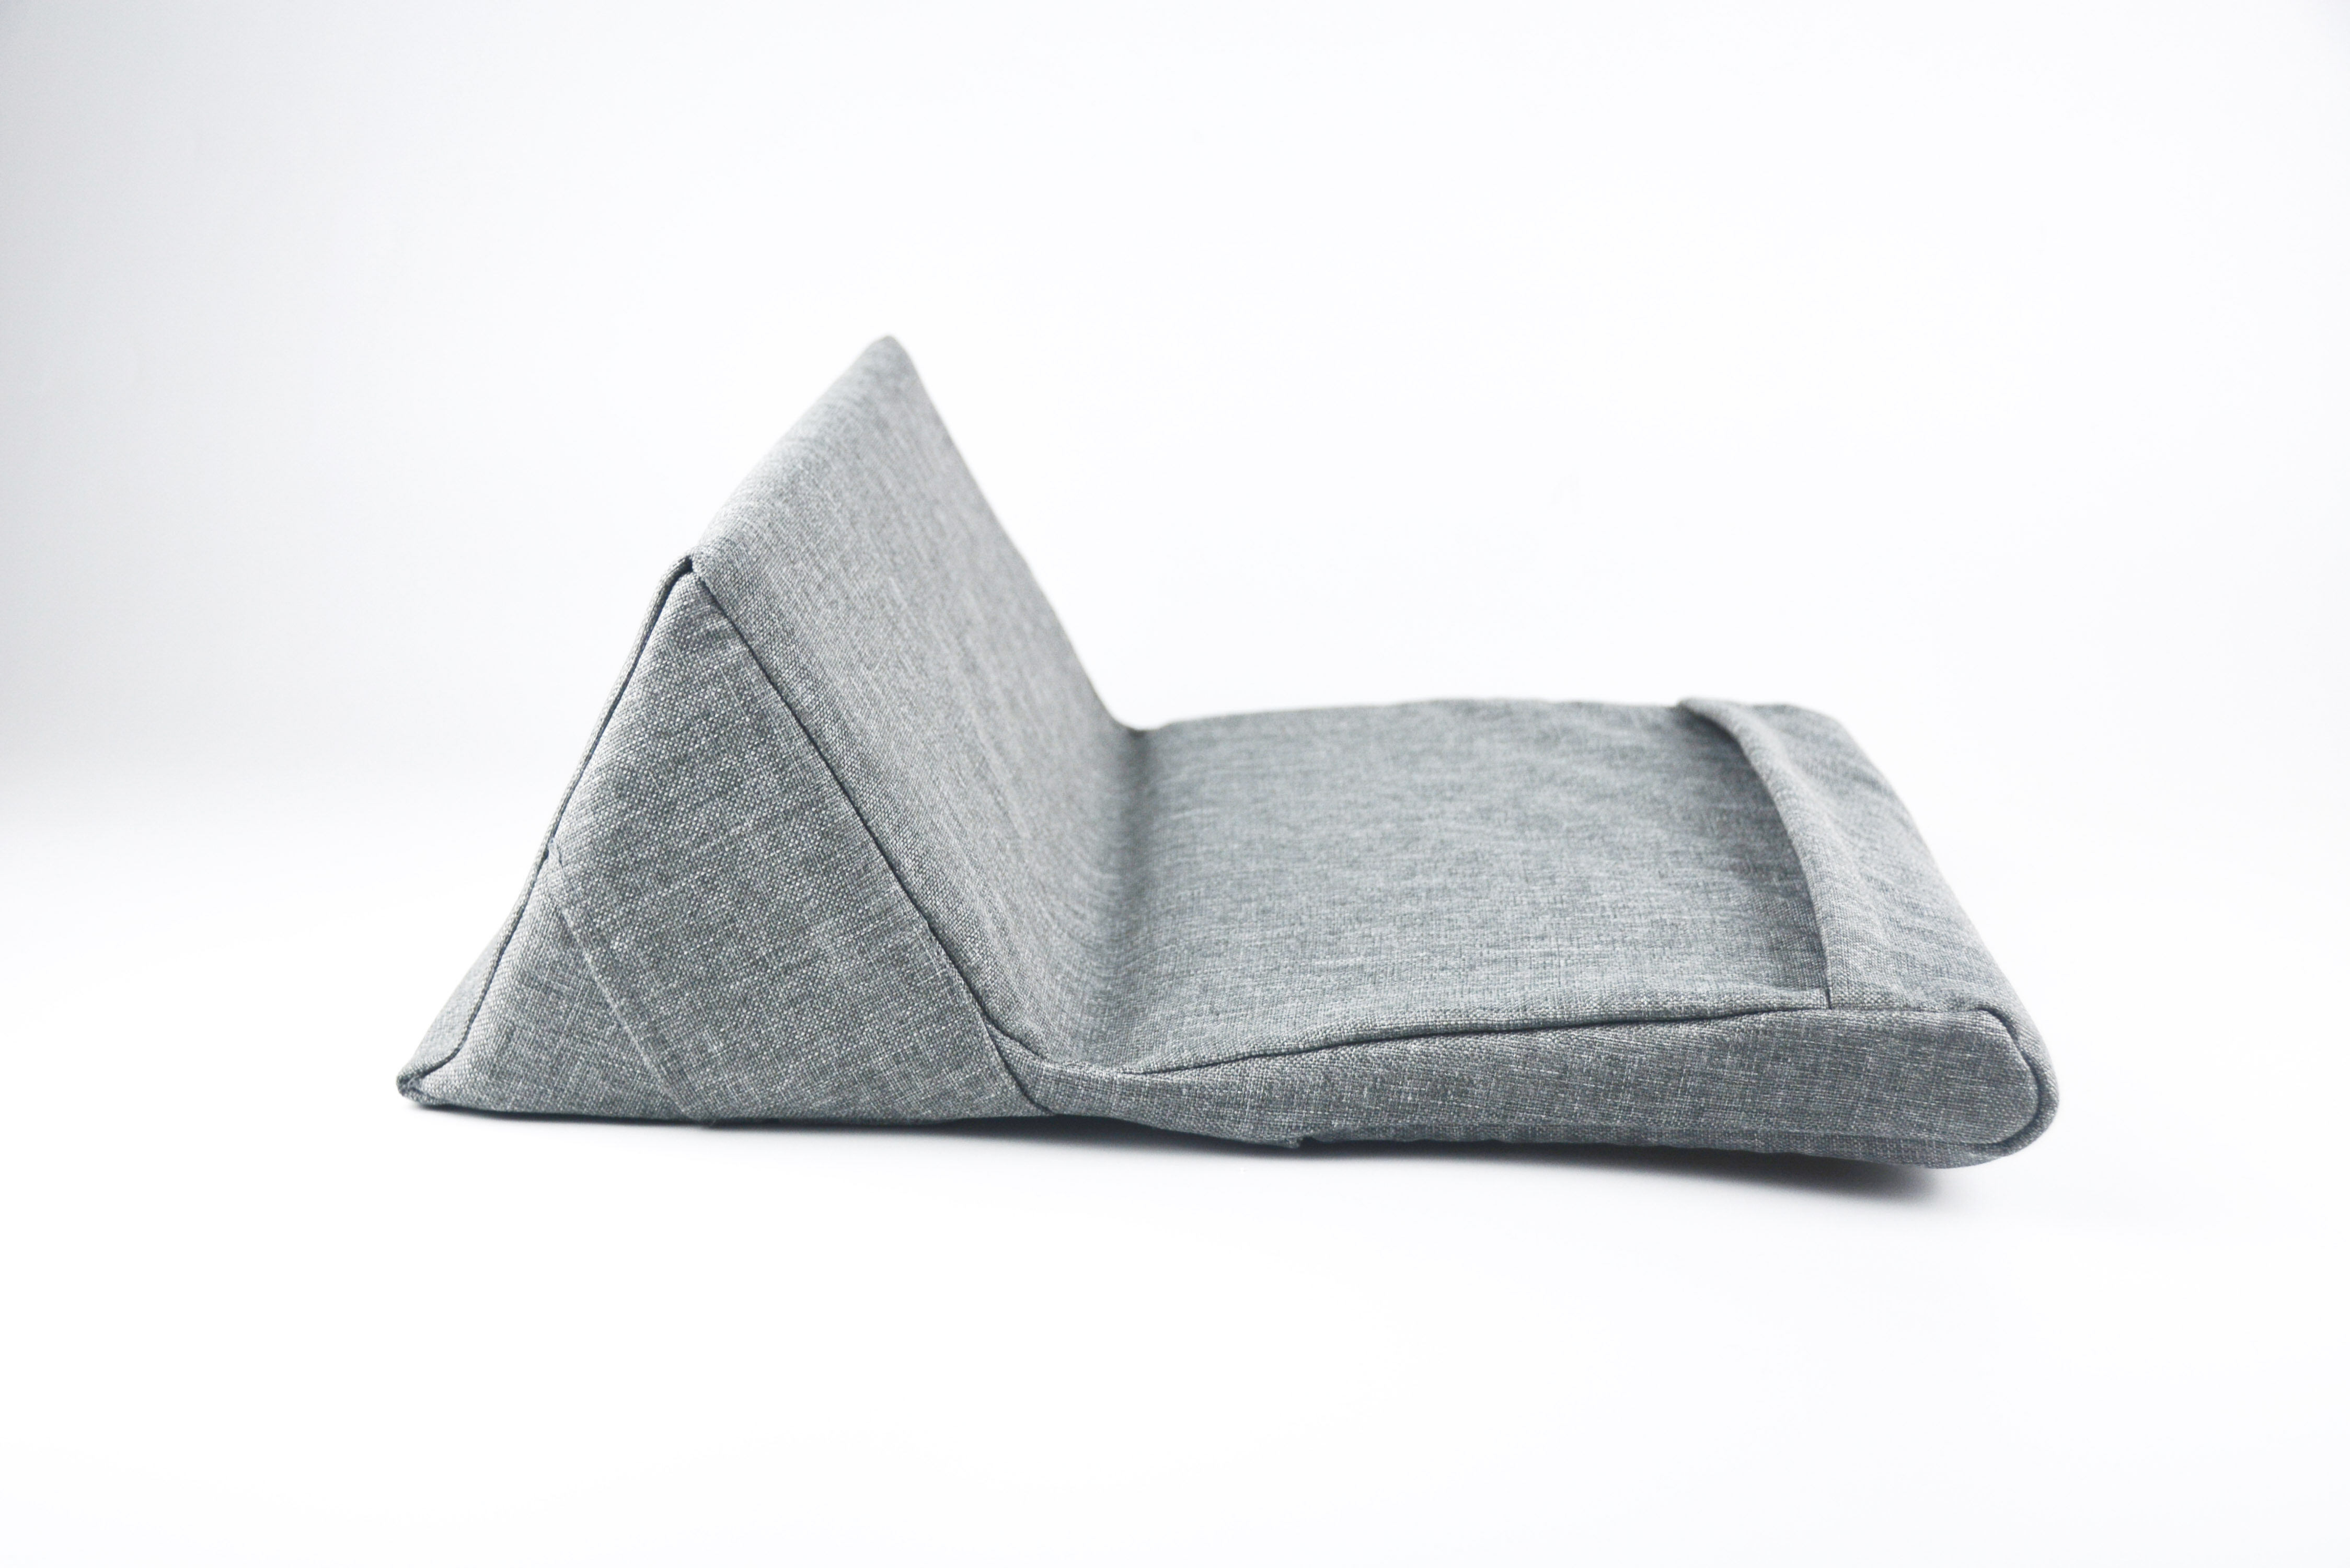 Woven fabric Ipad cushion with fuctional pockets of storage and protecting from scratches or friction